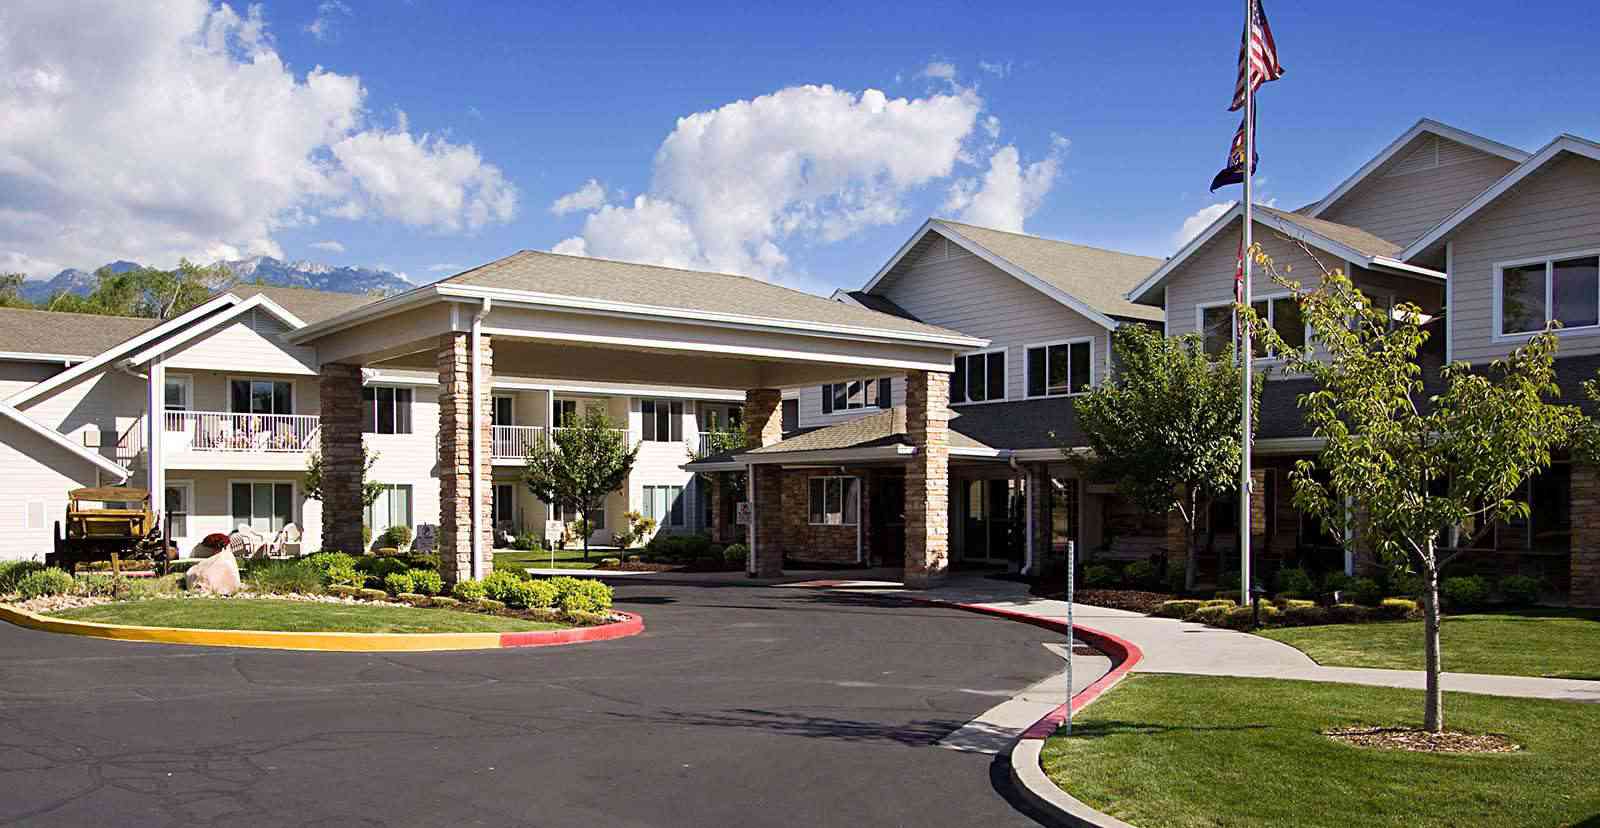 Contact Solstice Senior Living at Sandy